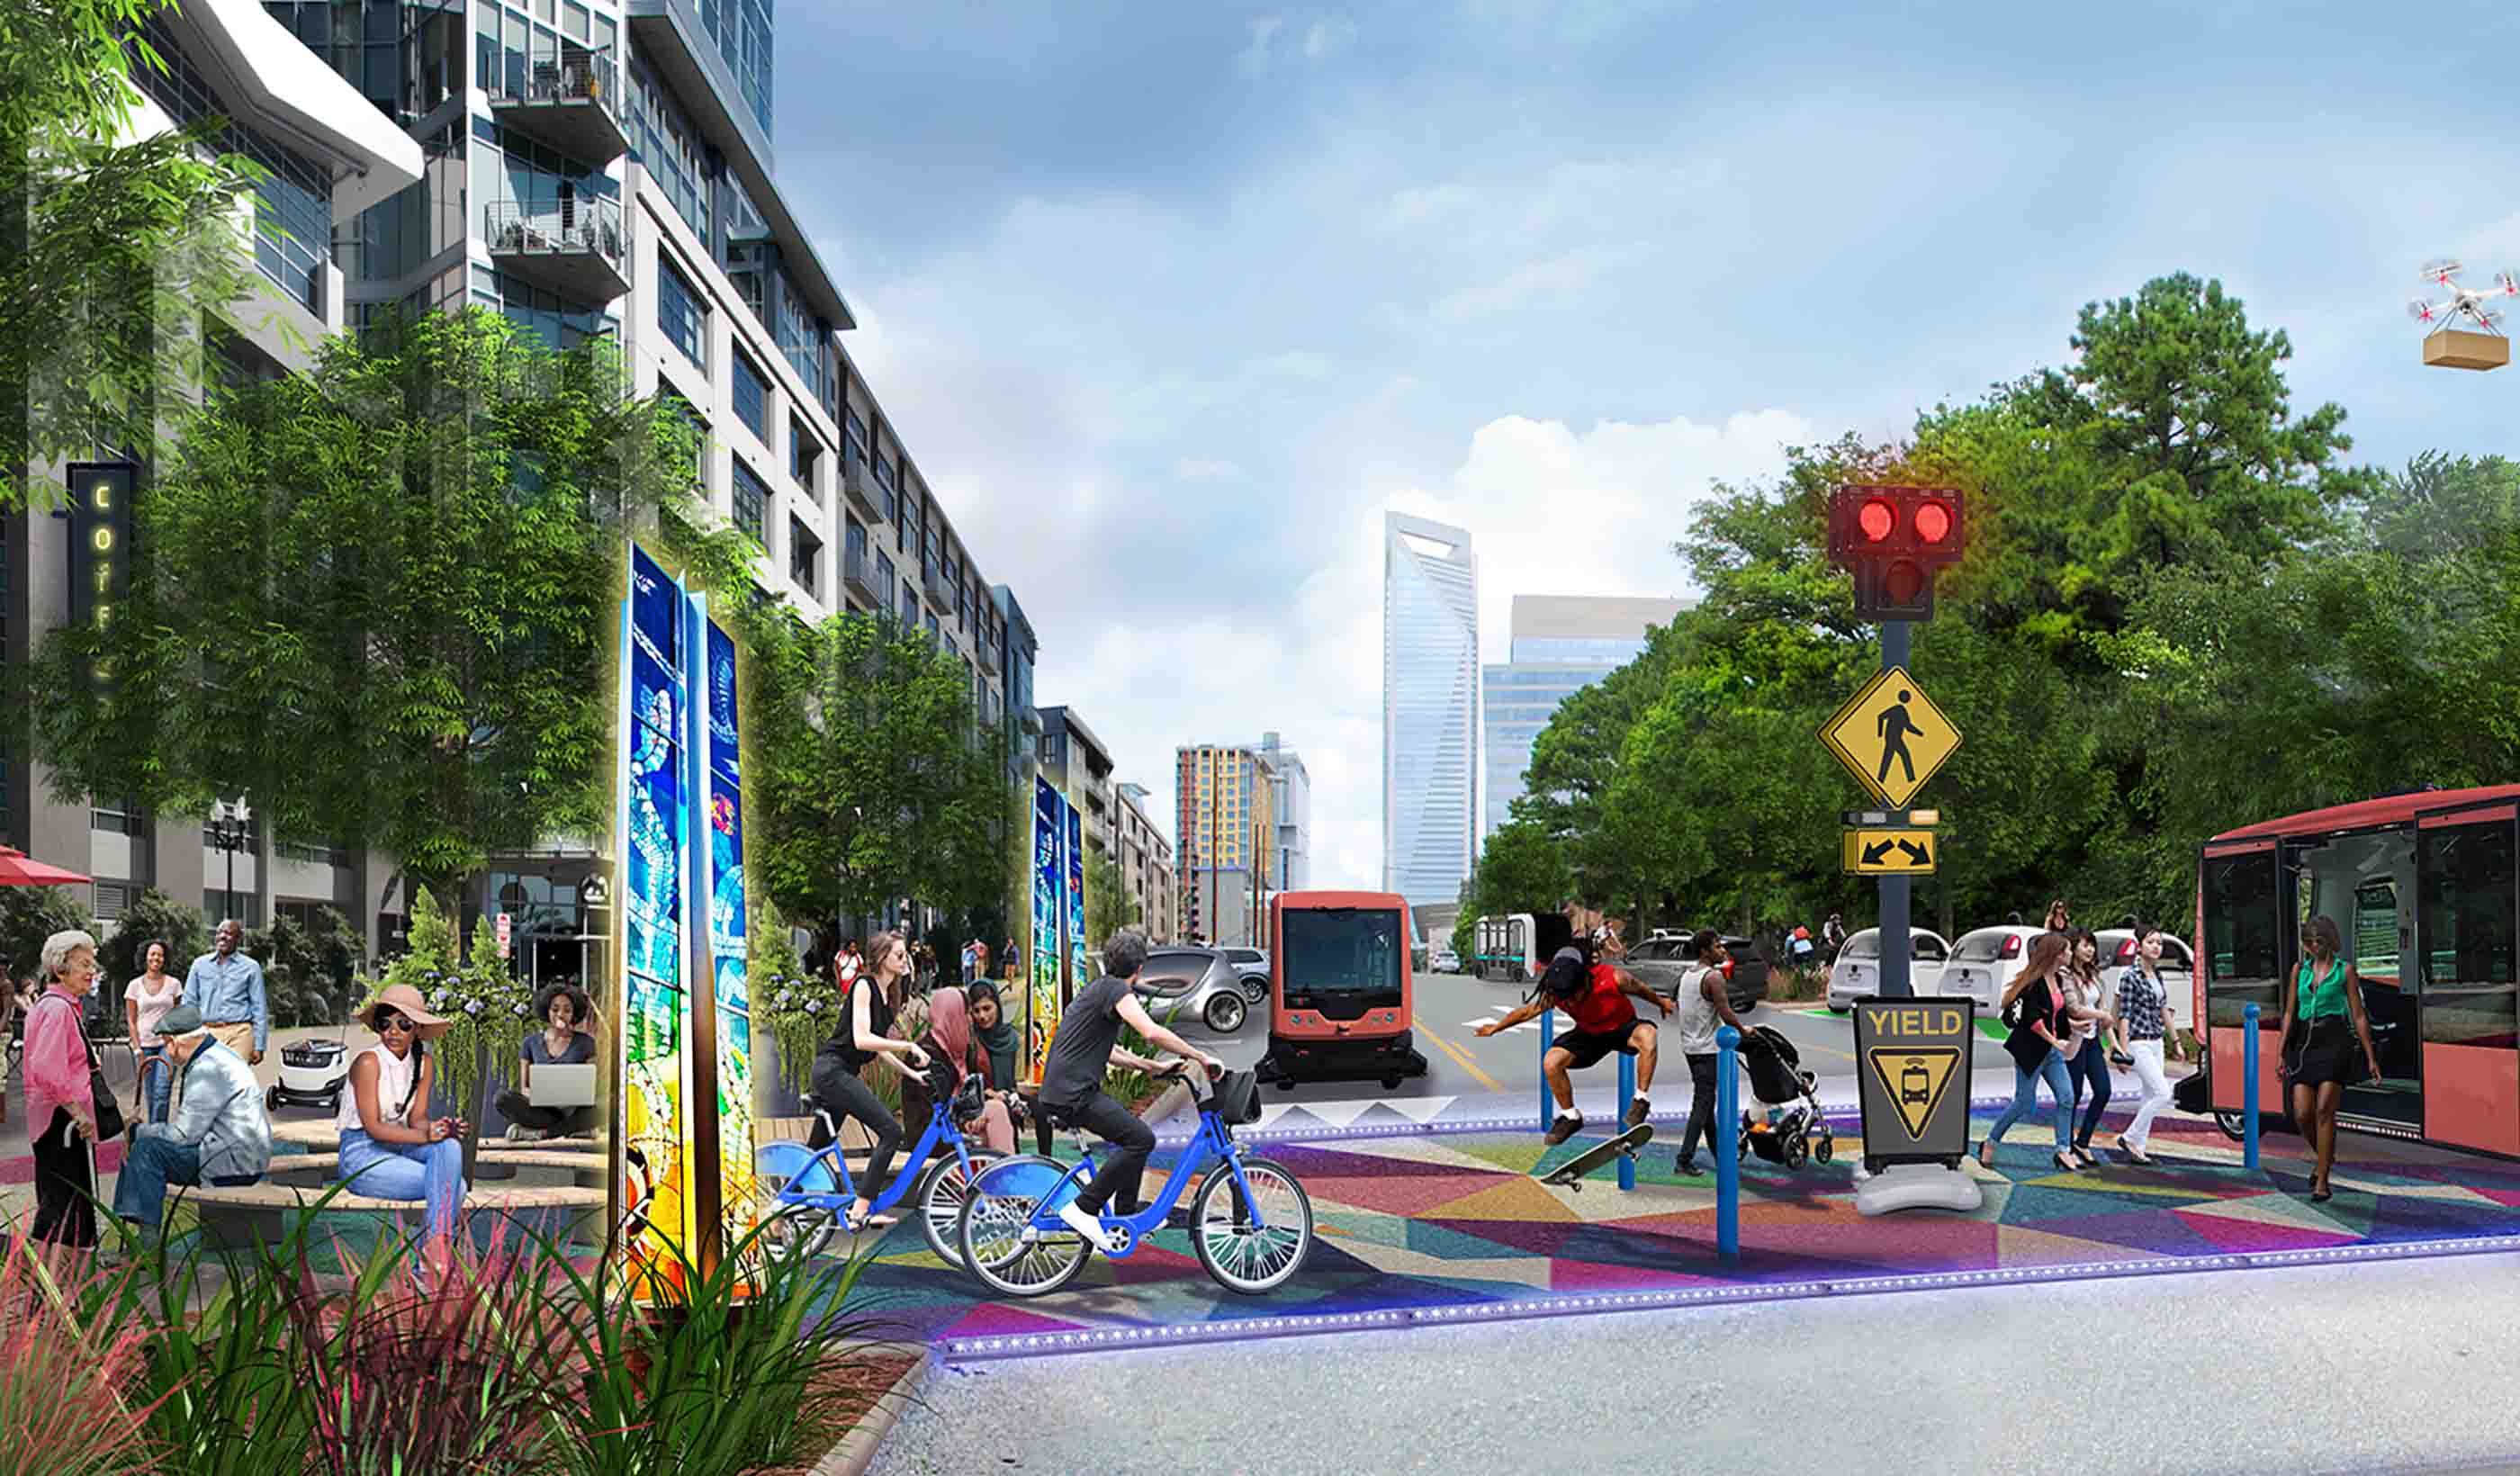 Autonomous vehicles could ruin our downtowns. But not if we act now